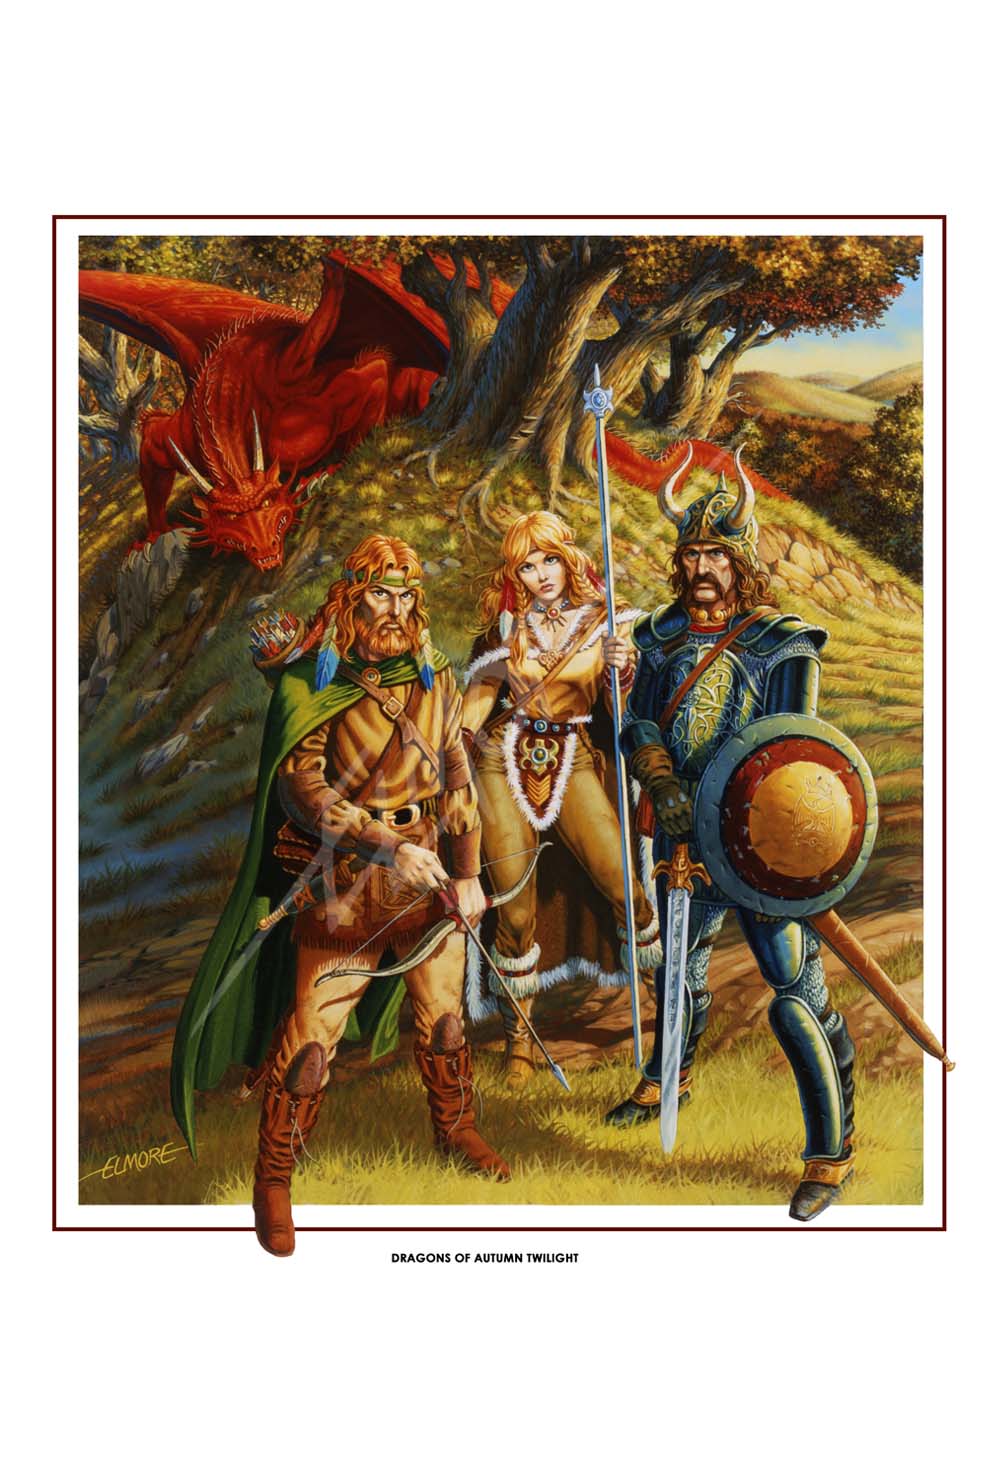 A print of Jeff Easley's awesome original 1984 cover for the book featuring Tanis, Goldmoon, and Sturm. (Image: Wizards of the Coast)